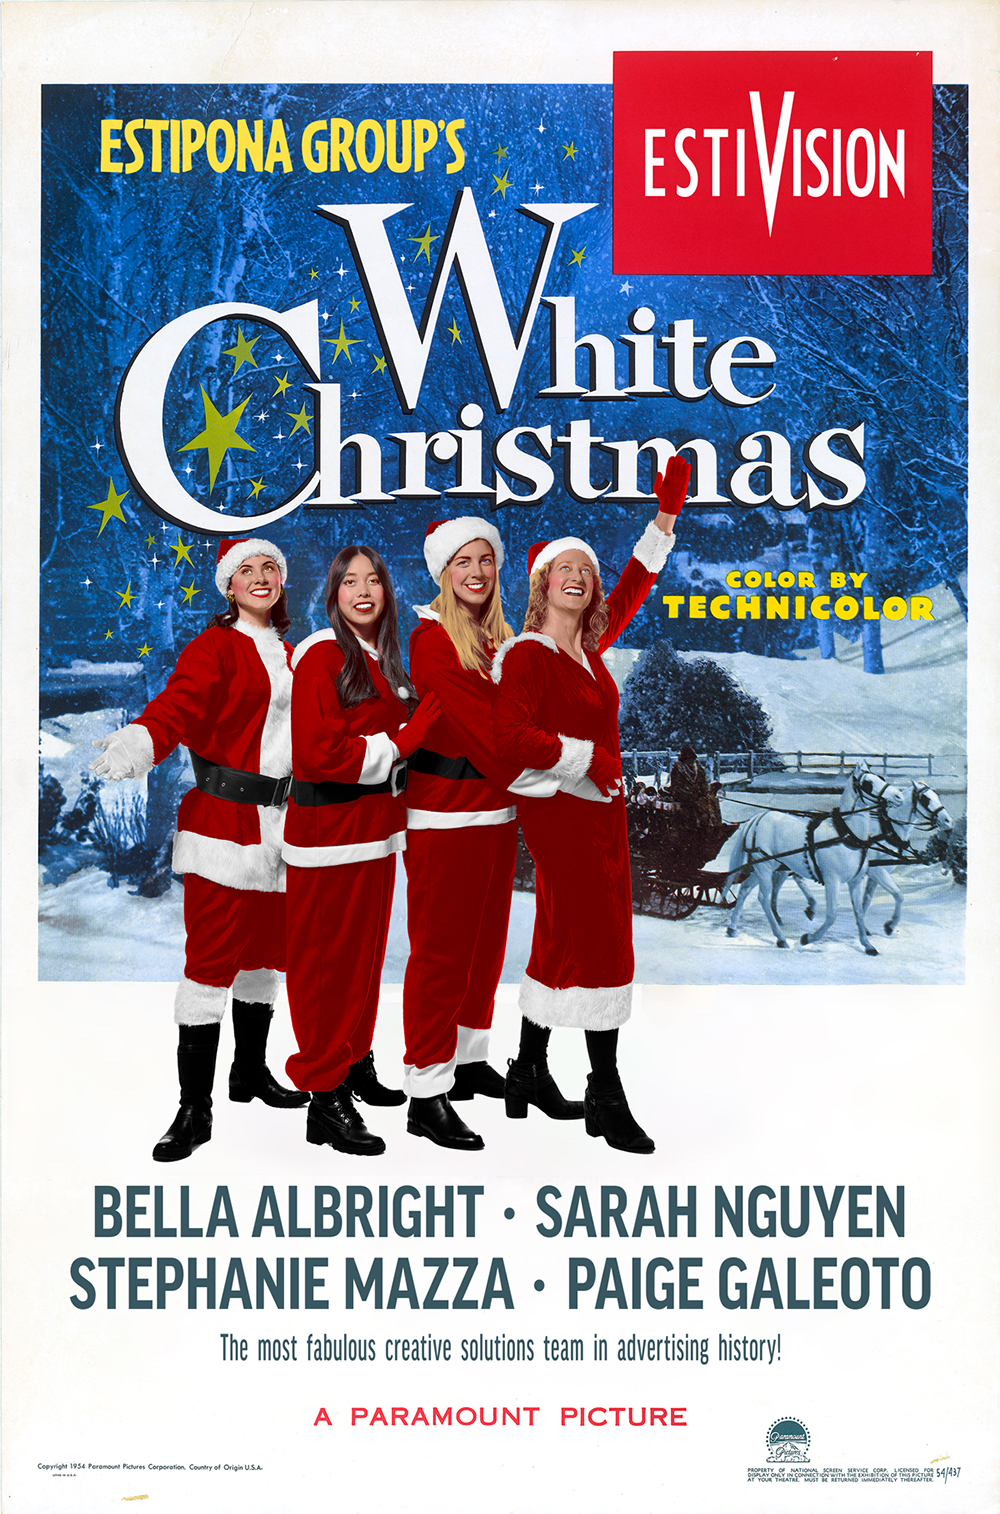 Estipona Group Christ Card - White Christmas featuring Bella, Sarah, Stephanie and Paige